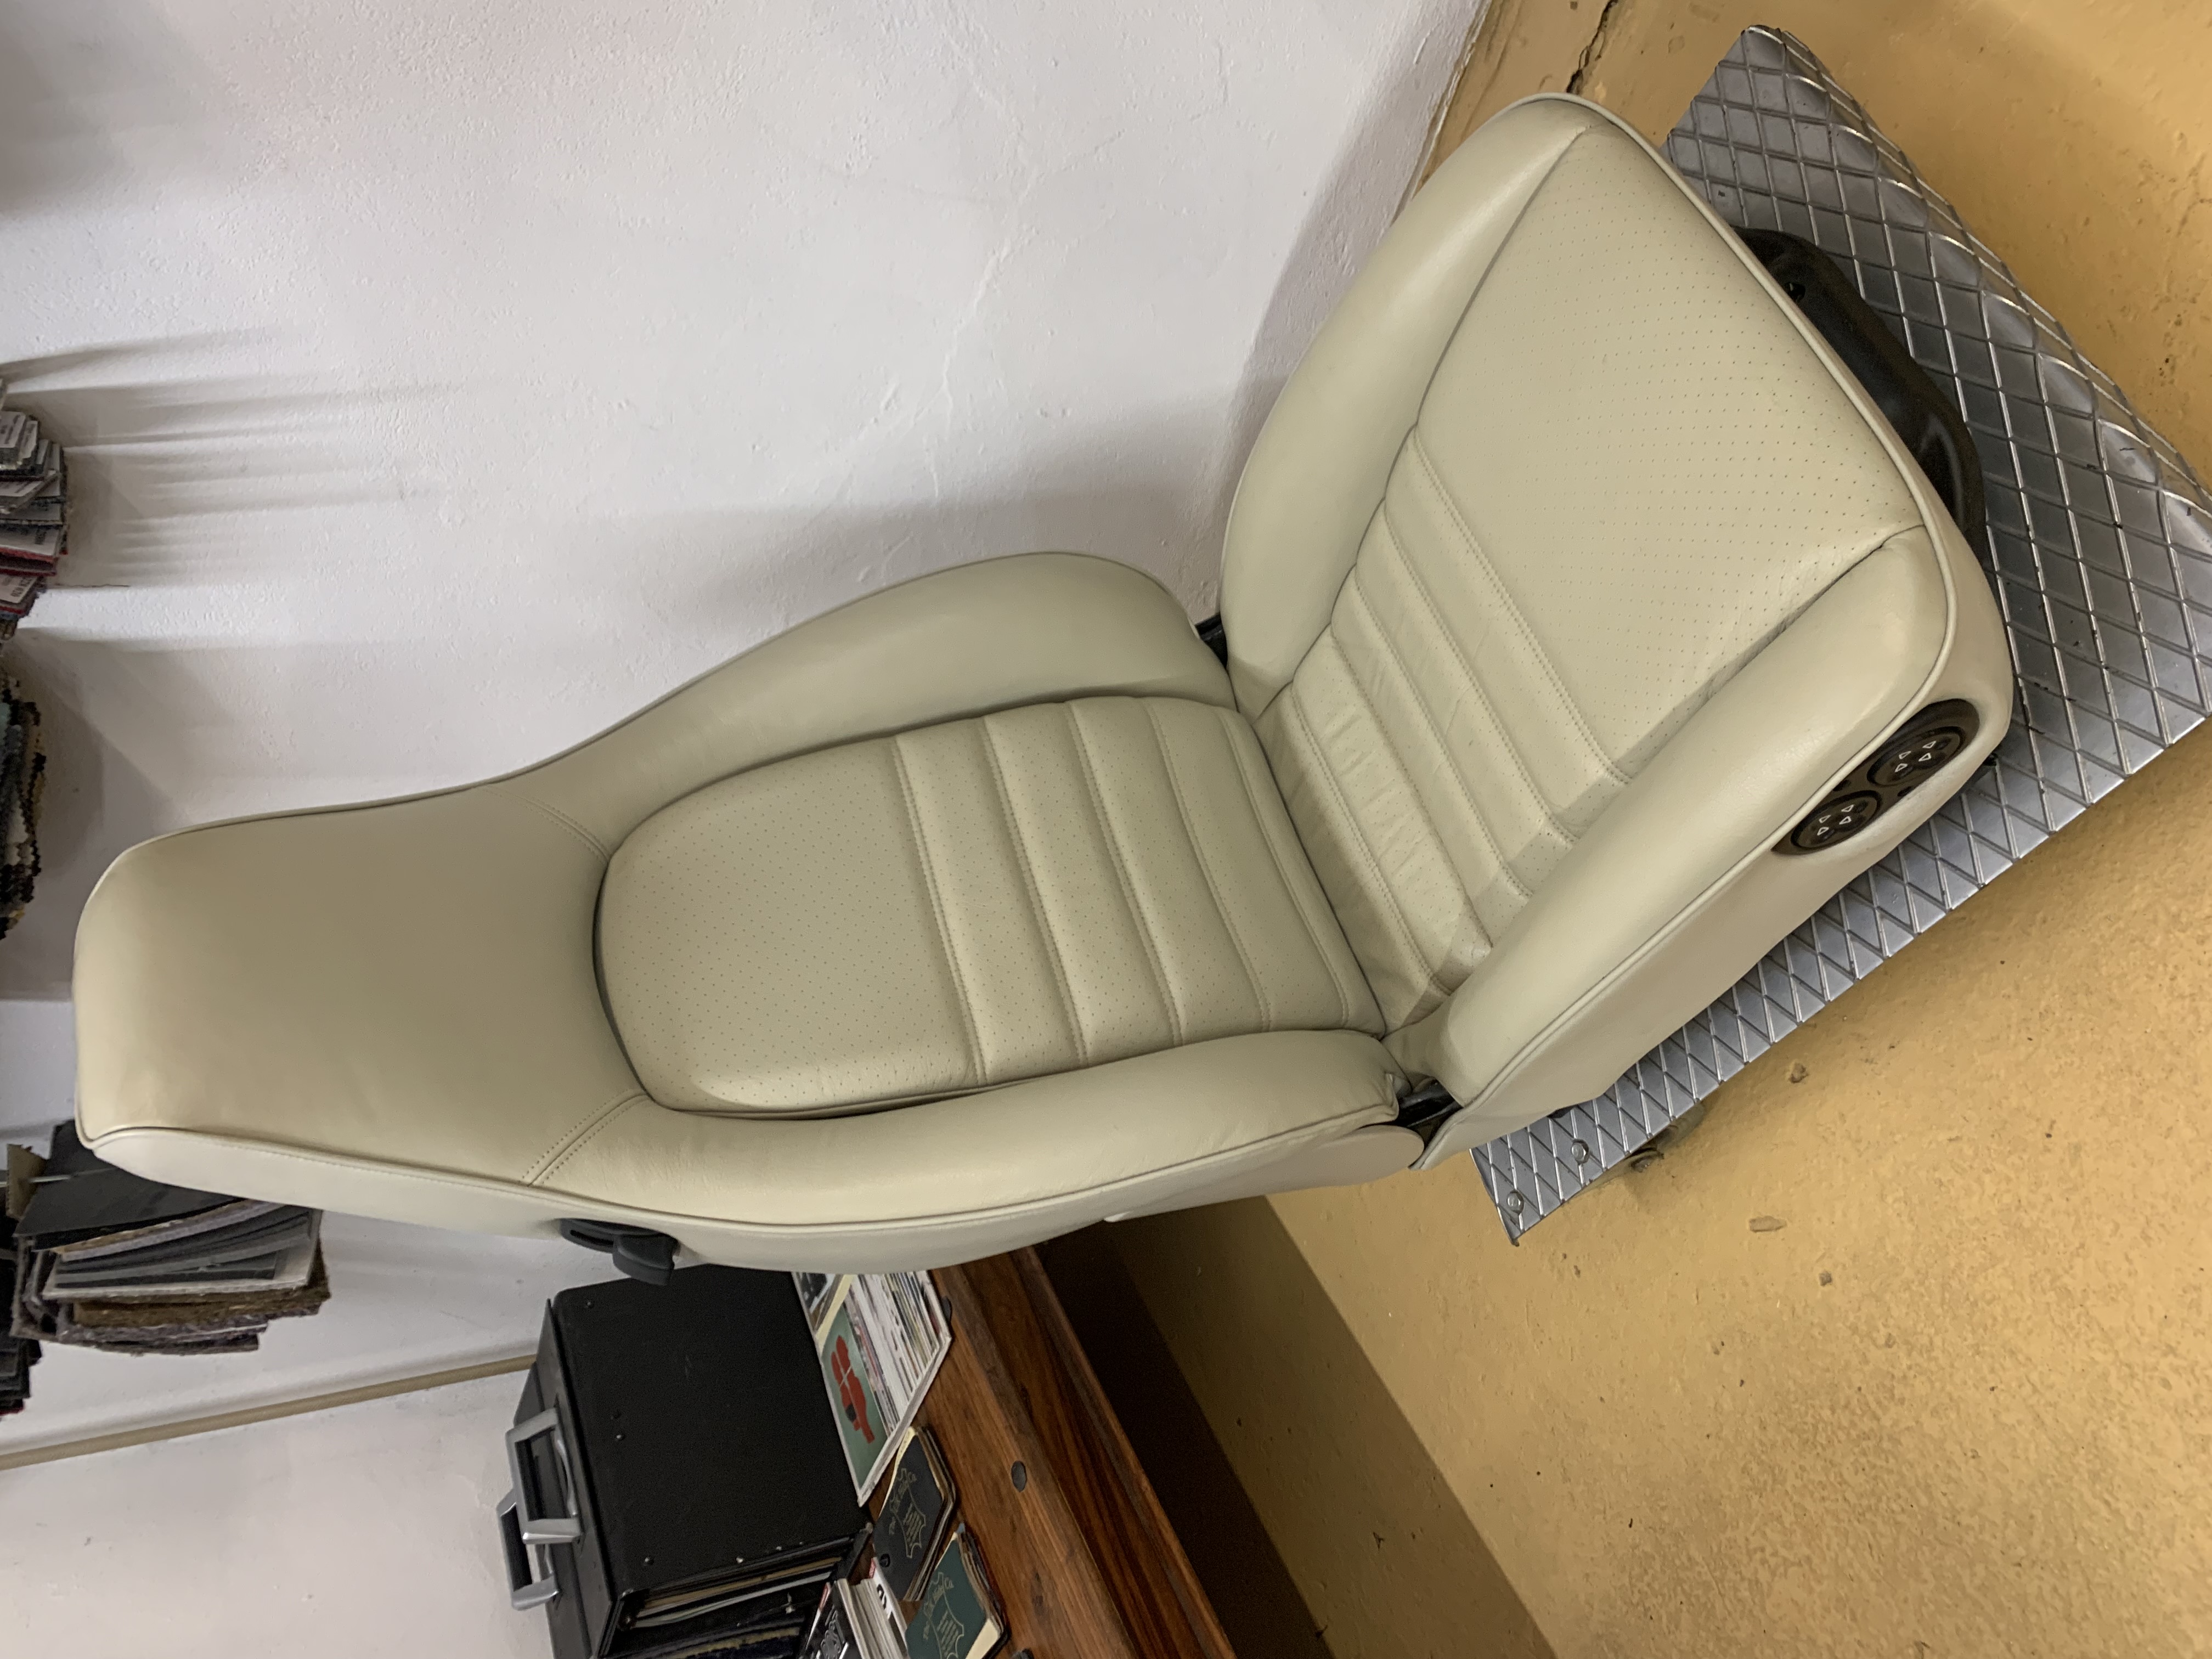 Porsche 911 standard comfort seat 8 way in Linen leather, Ex demo @ £675.00 + £45.00 if wheeled display base required